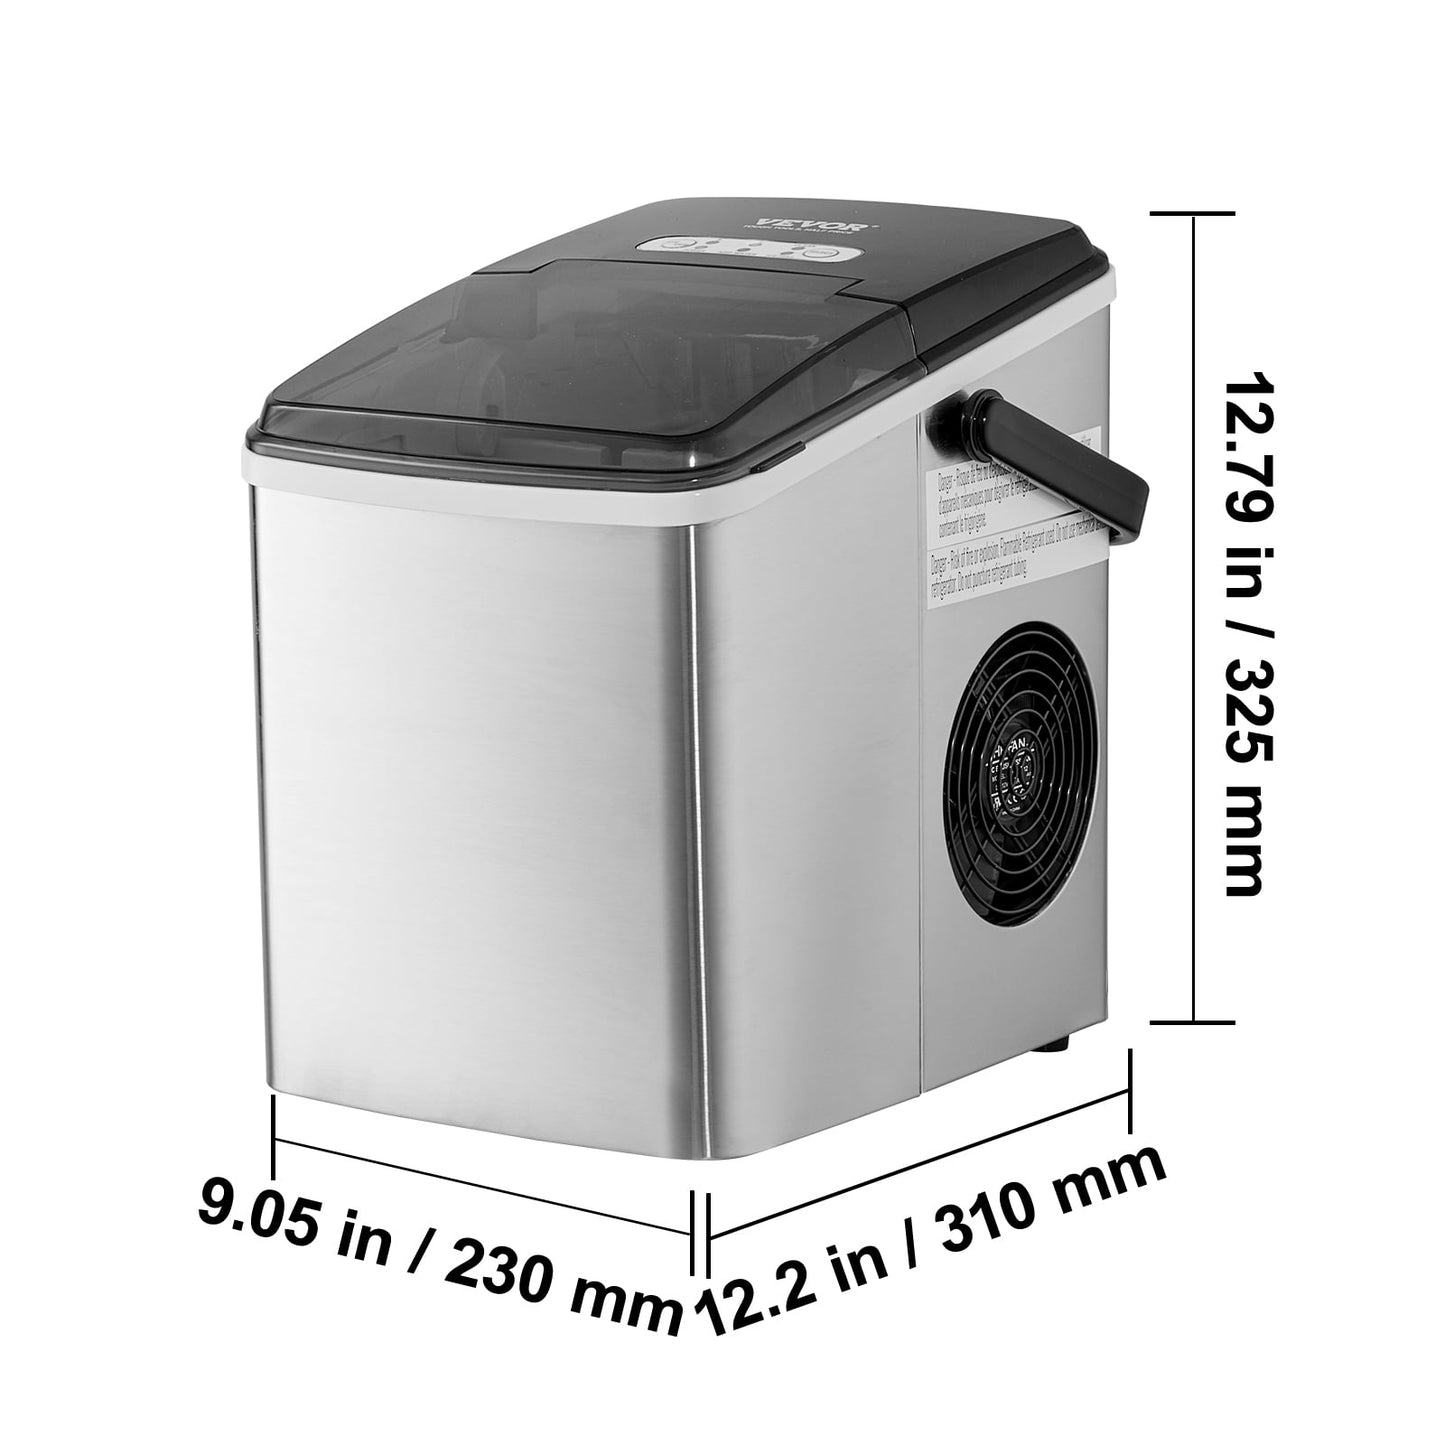 BENTISM Portable Countertop Ice Maker 33lbs/24H,Manual & Auto Refill Self-Cleaning with Scoop Basket,9 Cubes Ready in 7 Minutes, with Scoop and Basket 「00000000ABCDEFG」